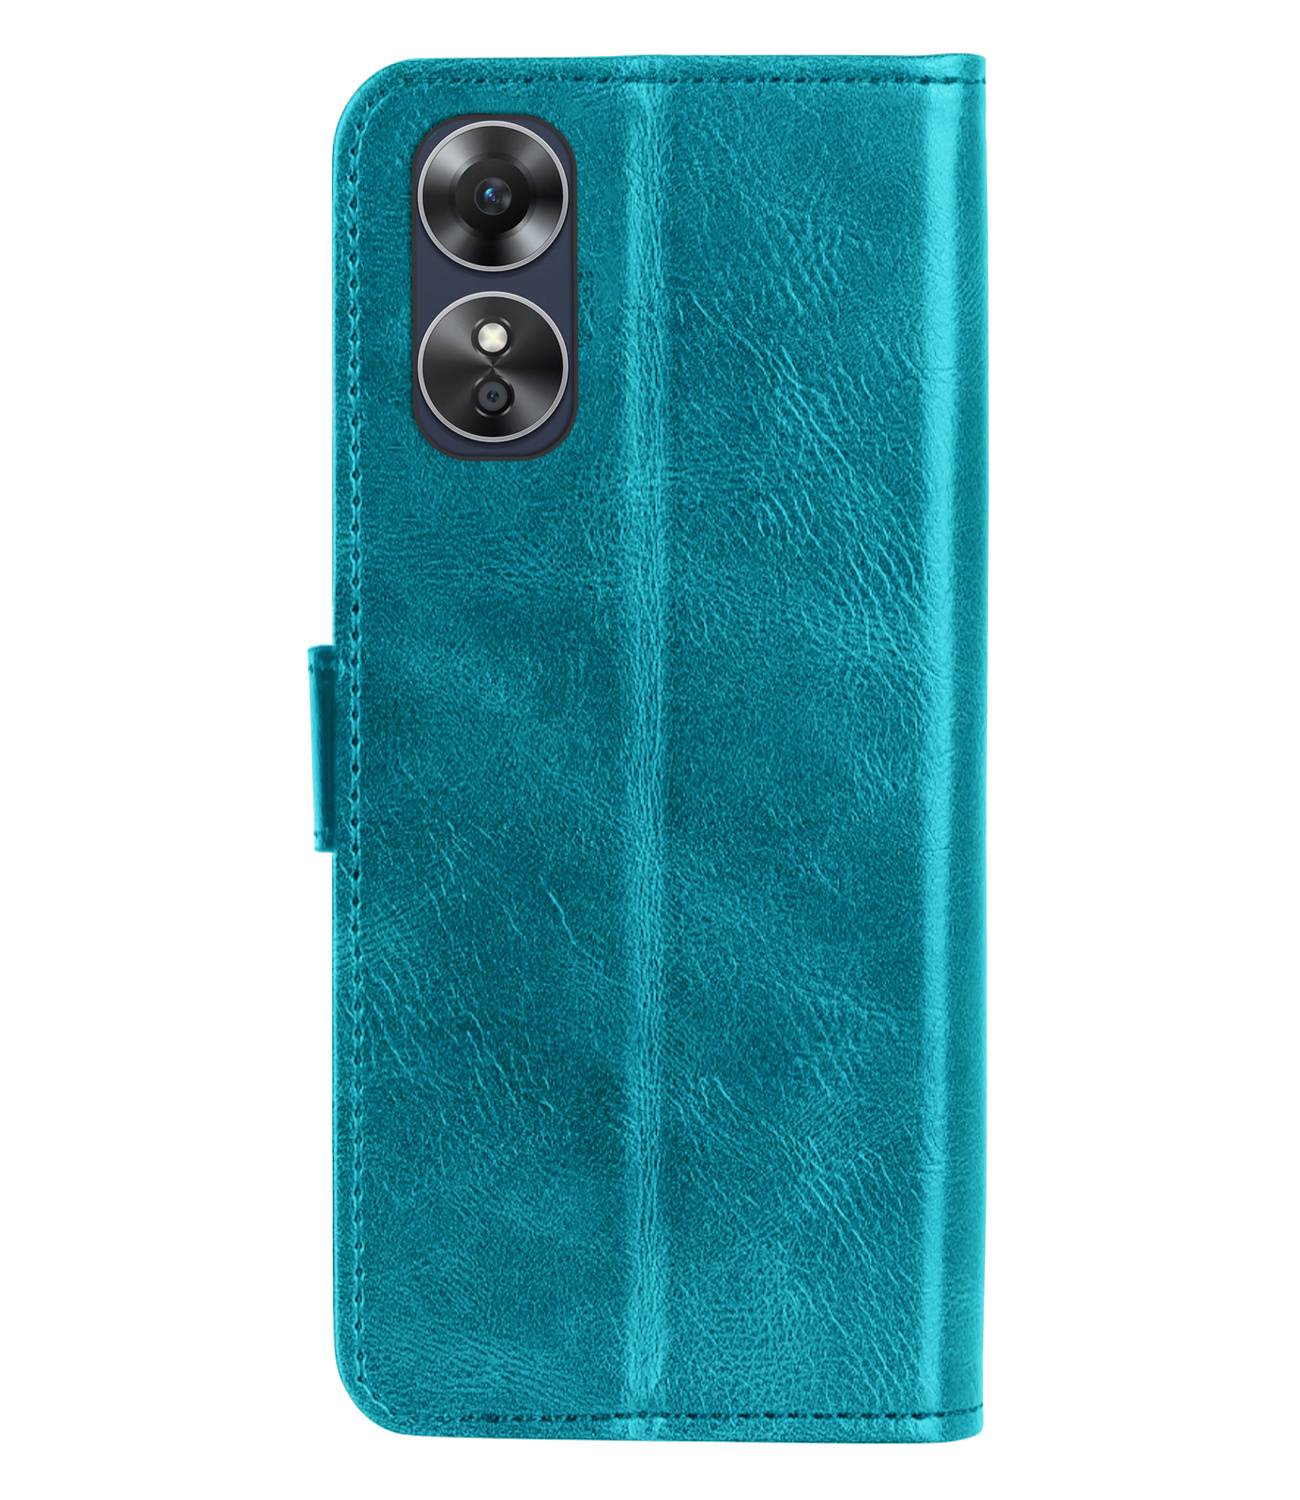 OPPO A17 Hoes Bookcase Flipcase Book Cover - OPPO A17 Hoesje Book Case - Turquoise